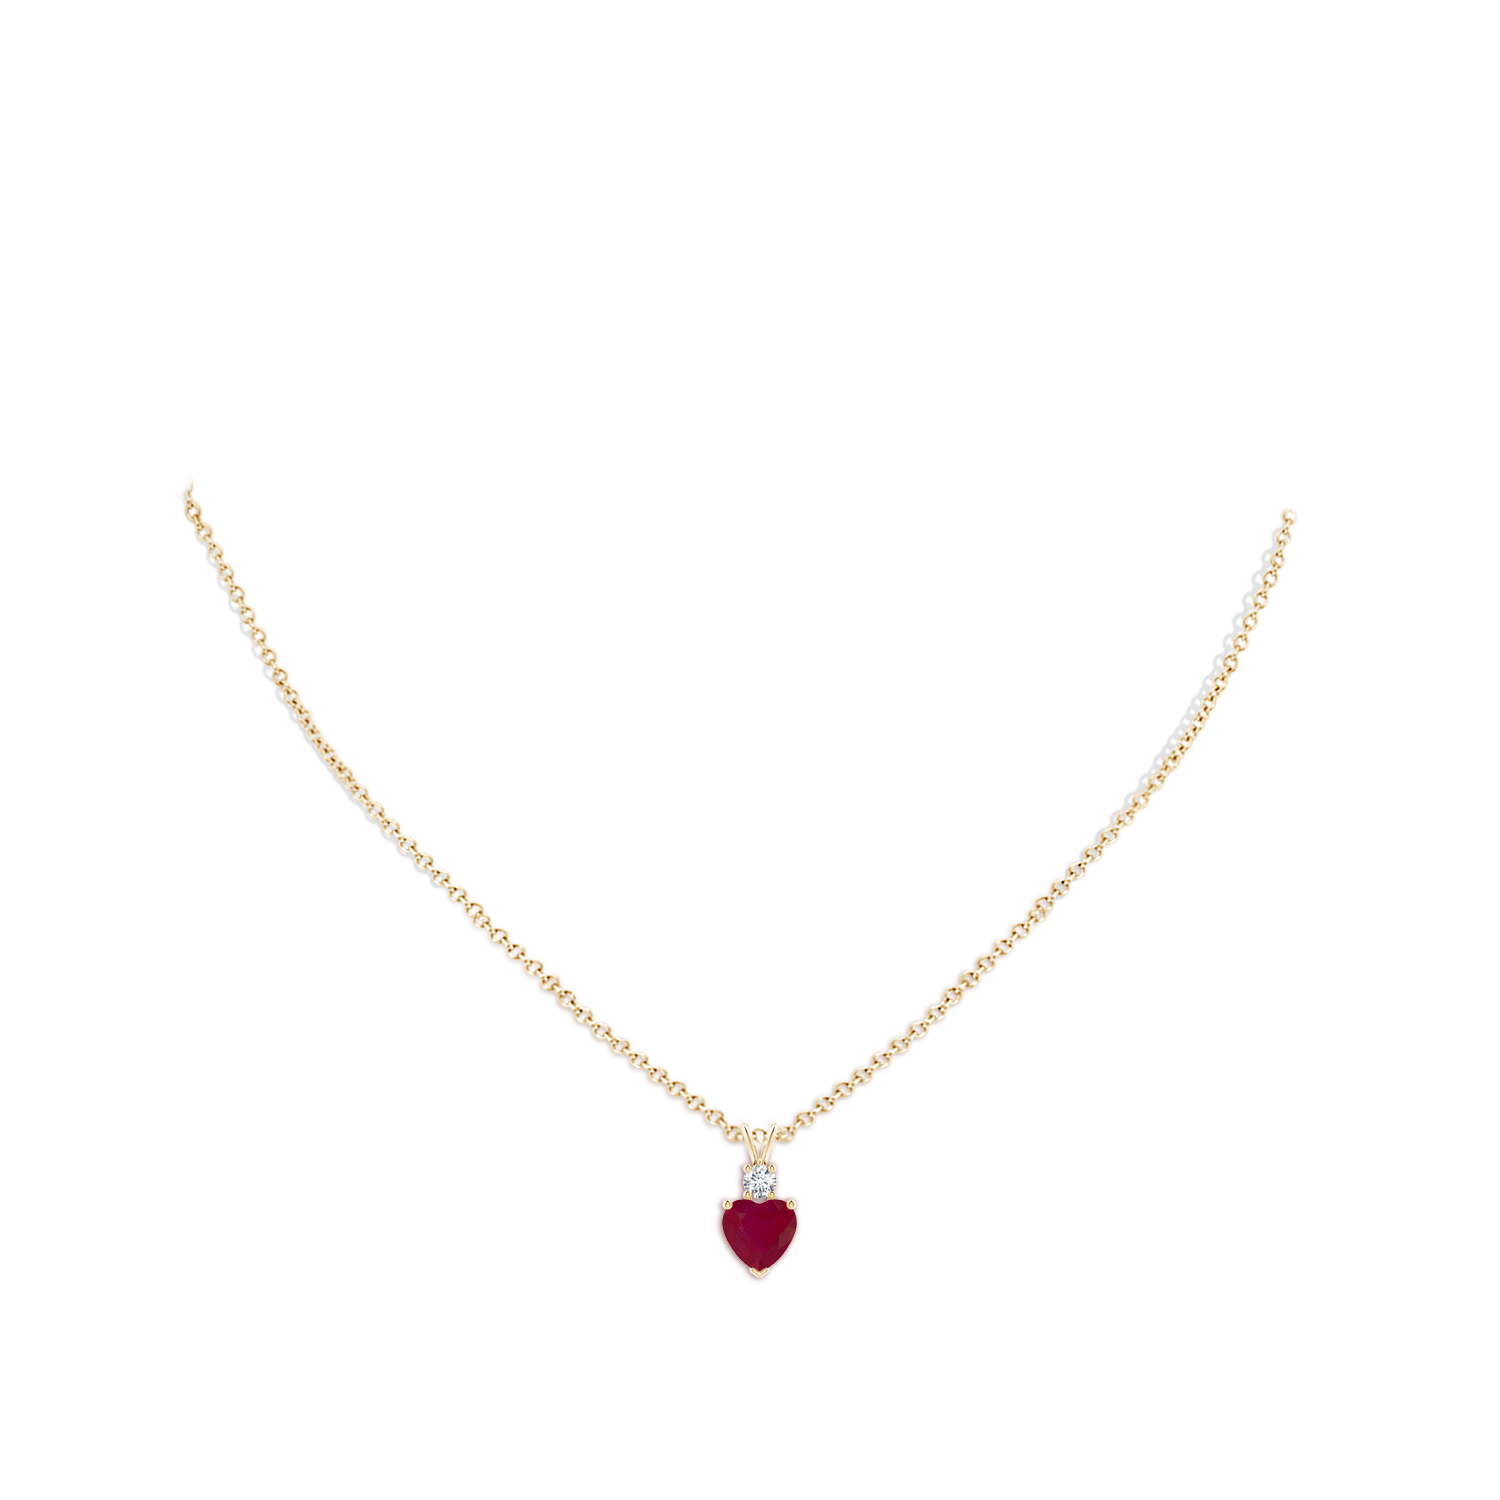 A - Ruby / 1.8 CT / 14 KT Yellow Gold